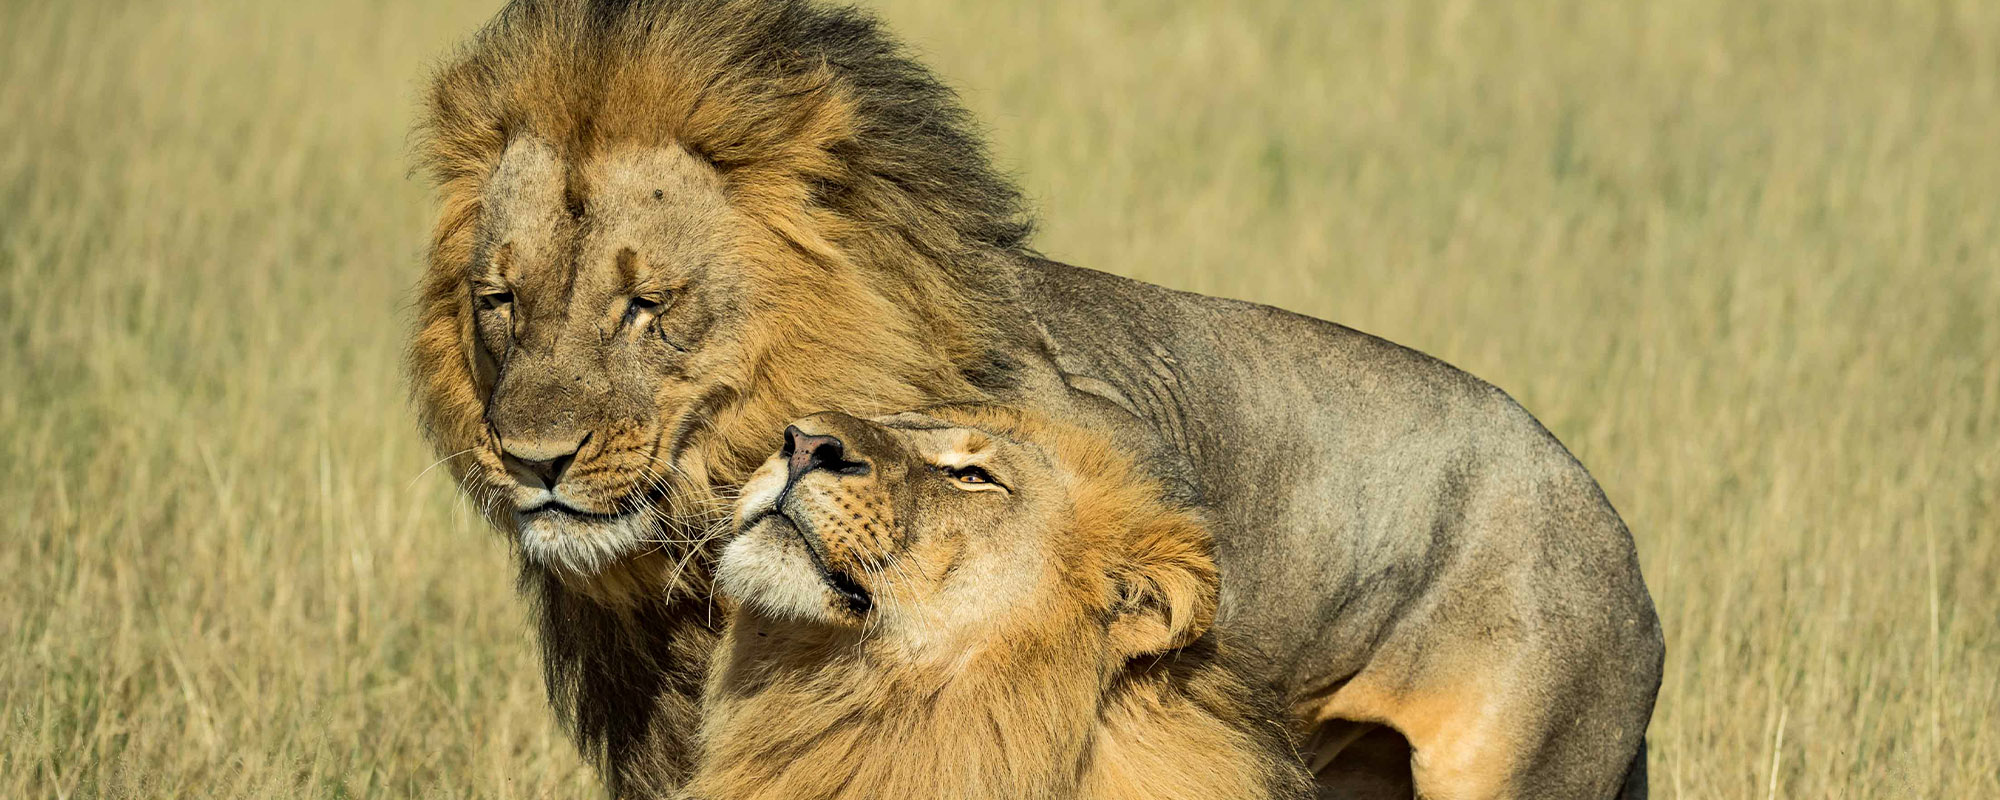 A photo of two male lions named Netsai and Humba in Hwange National Park, Zimbabwe